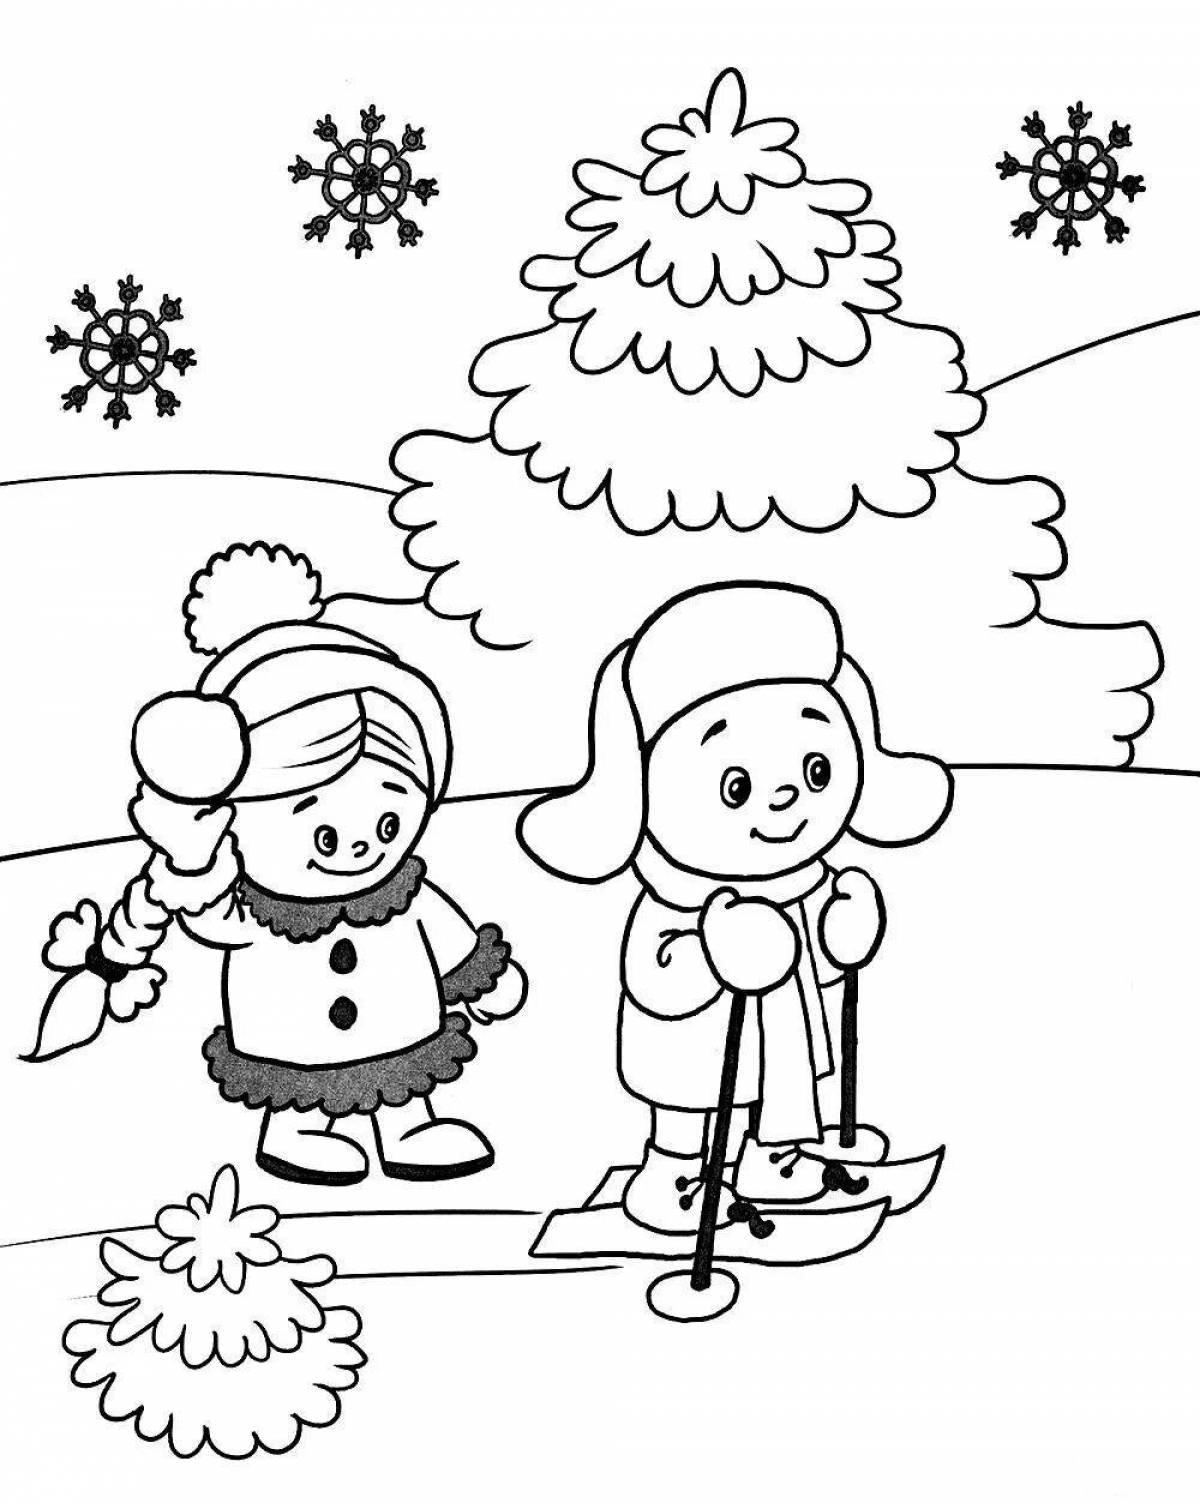 Winter activities for 6 year olds #3